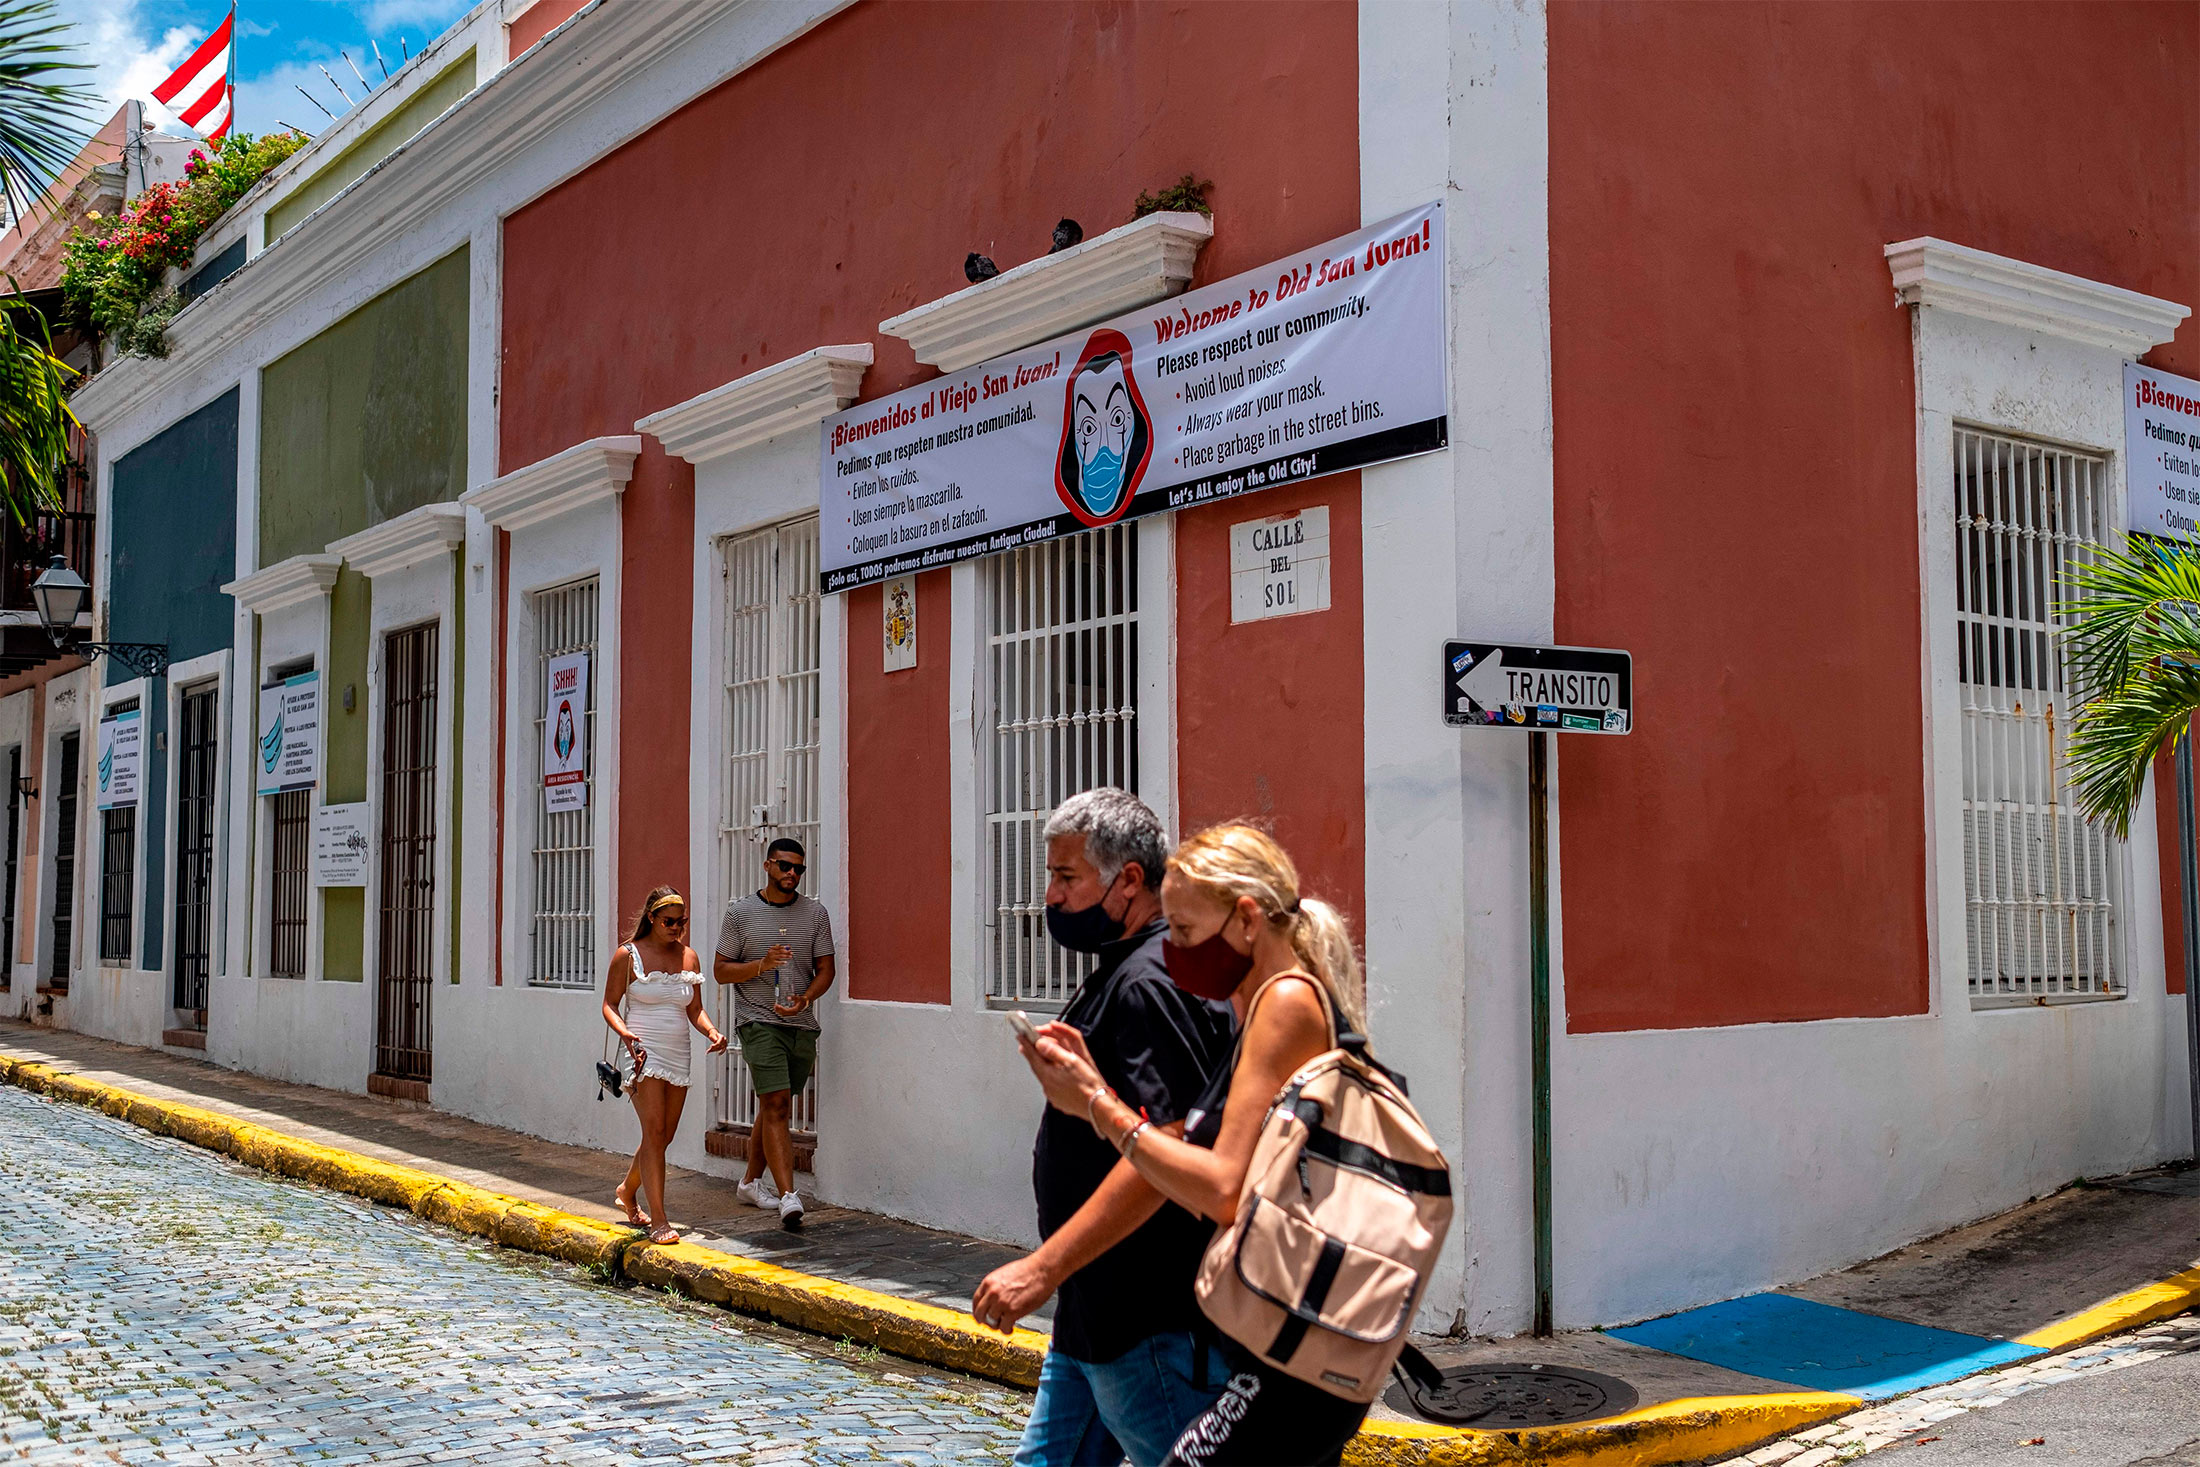 Puerto Rico sees a surge in tourism – and a rise in aggressive tourist  behavior, Puerto Rico